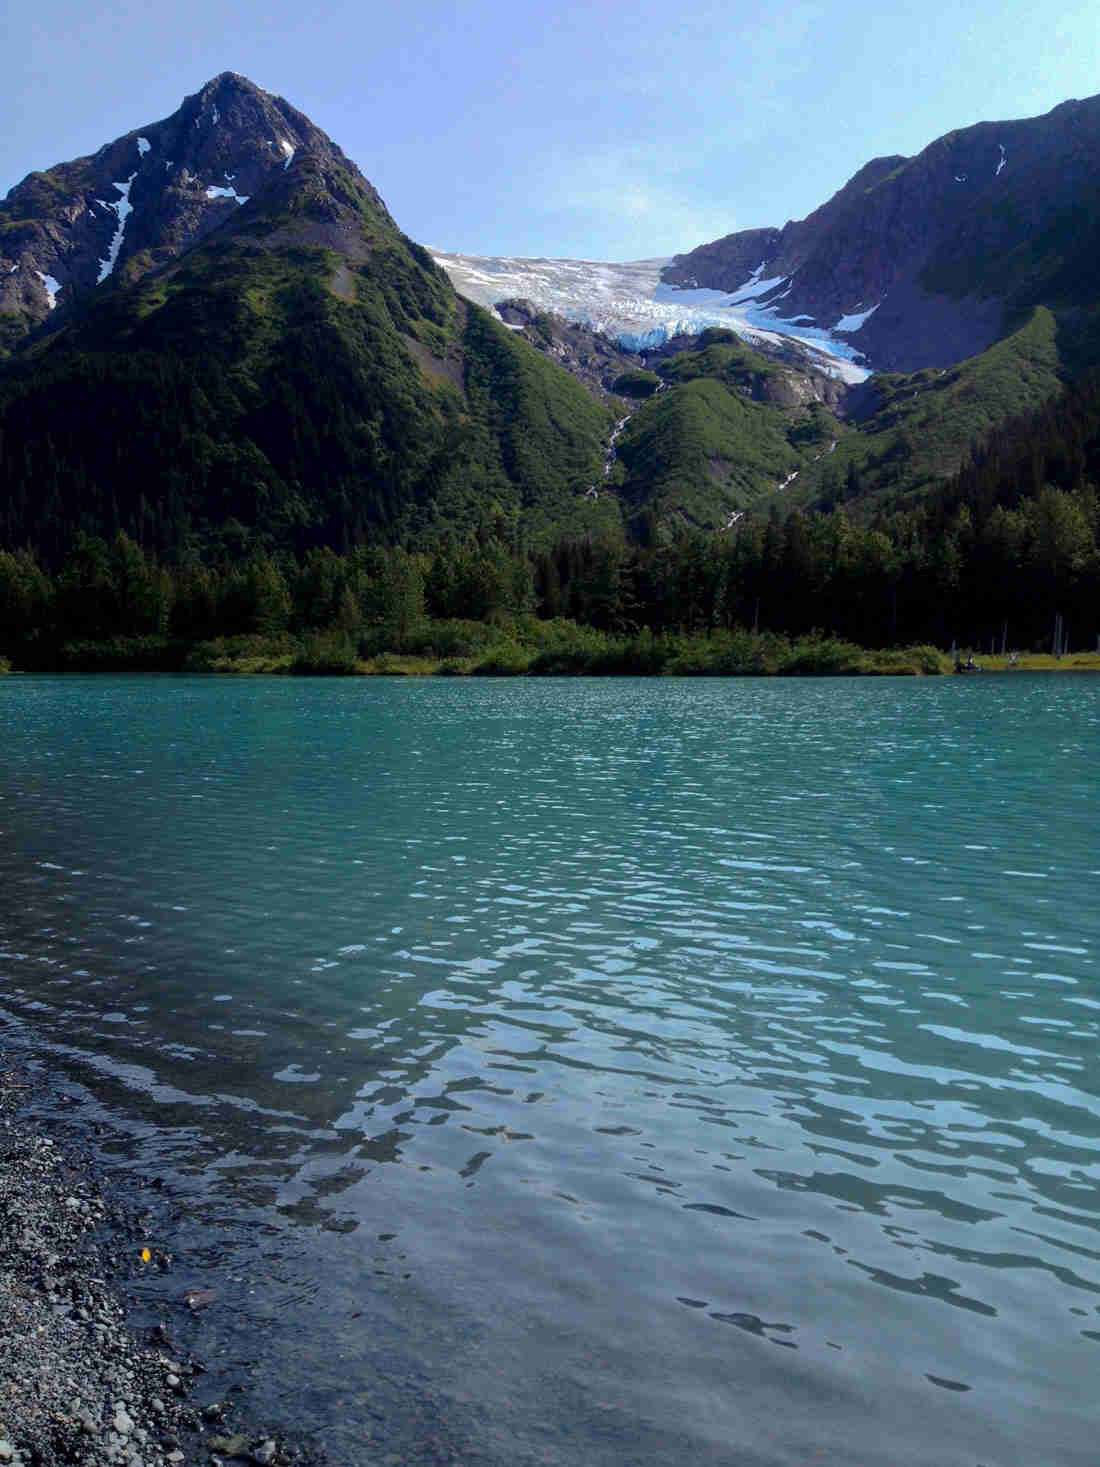 A turquoise, bluish lake, with a glacier on a mountain behind it